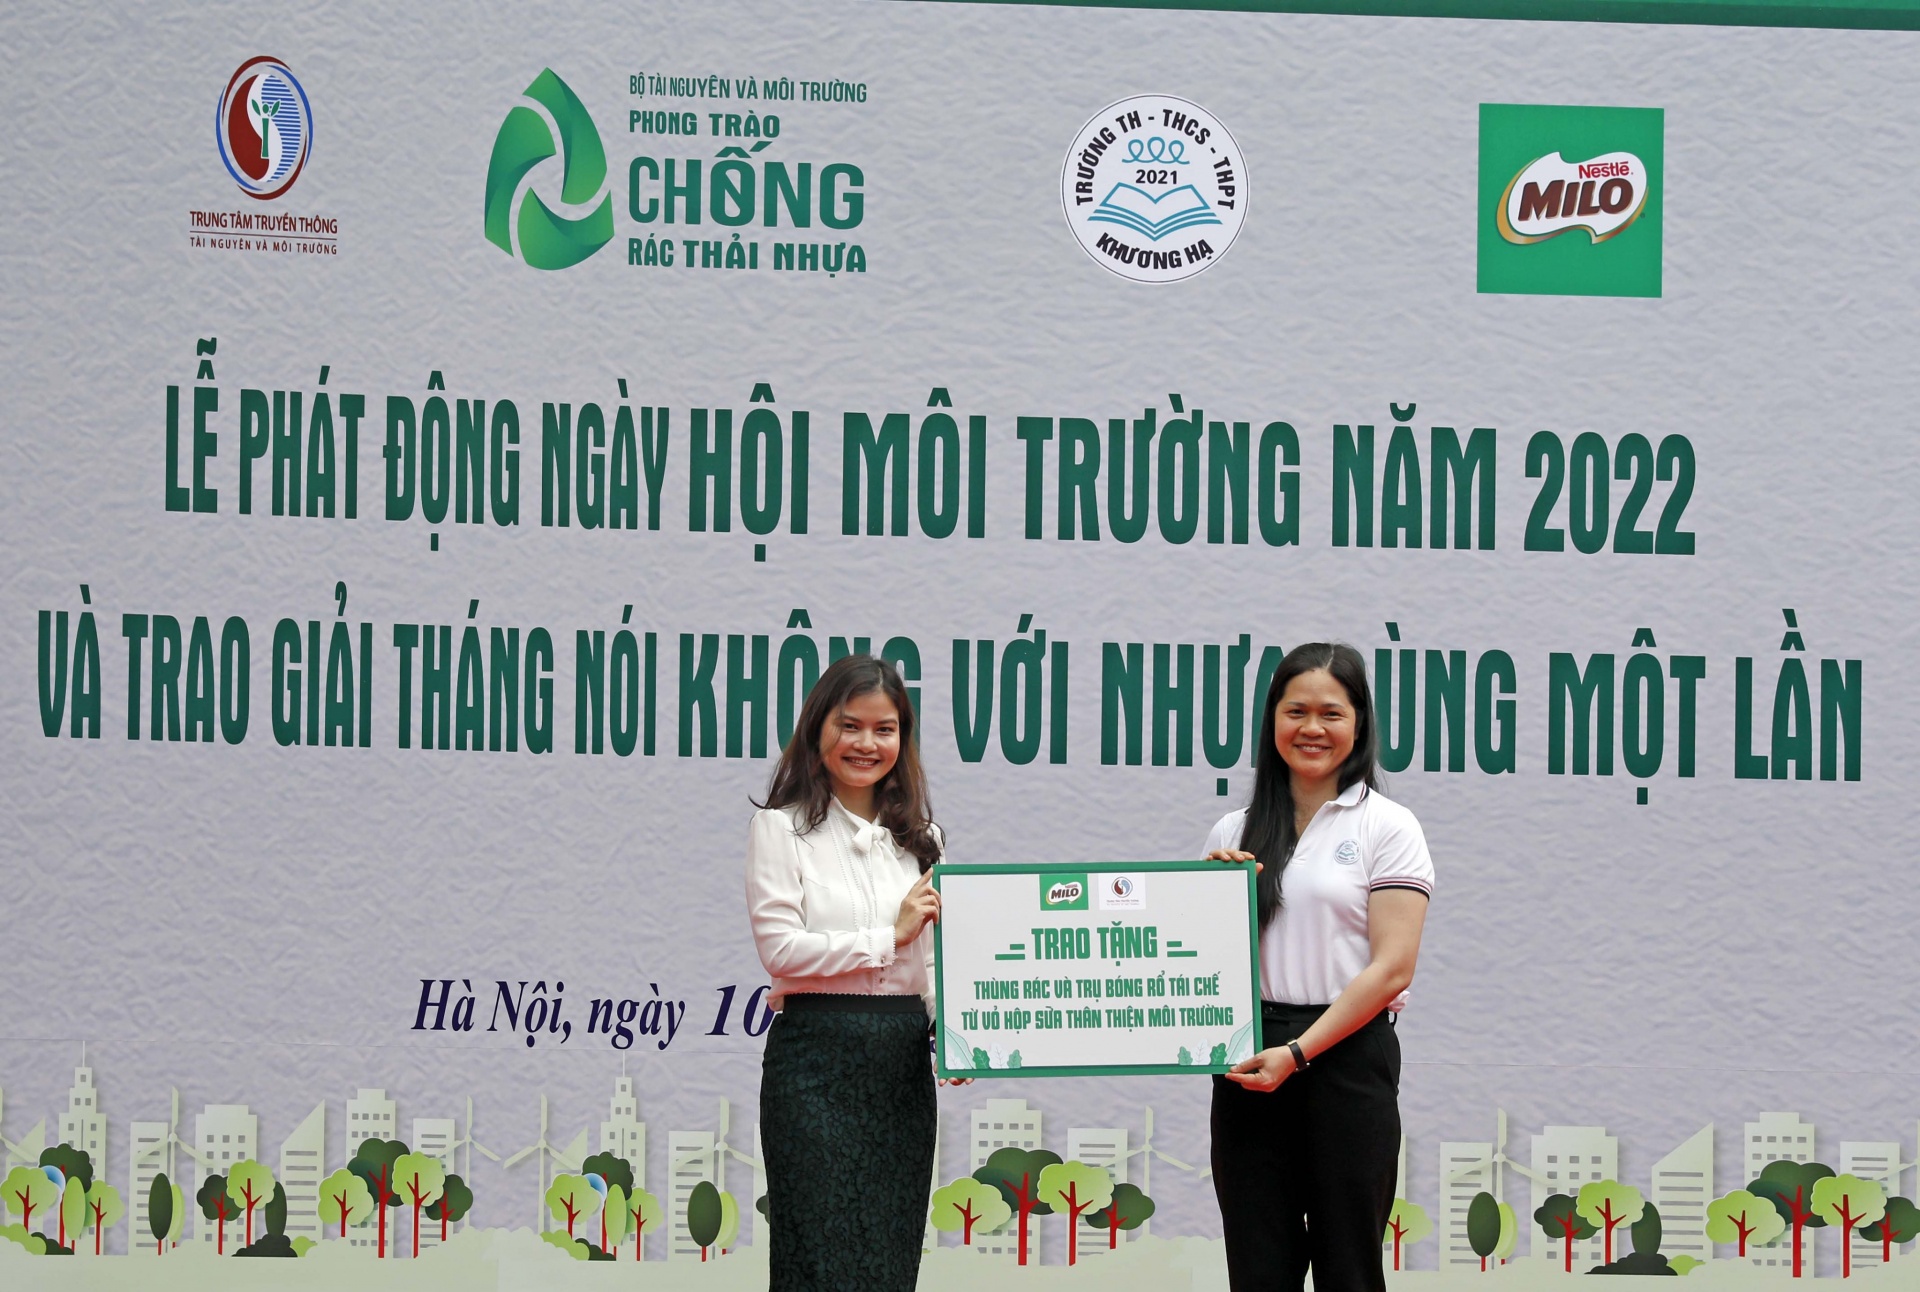 Nestlé MILO joins forces with MoNRE to kick off Environment Day 2022